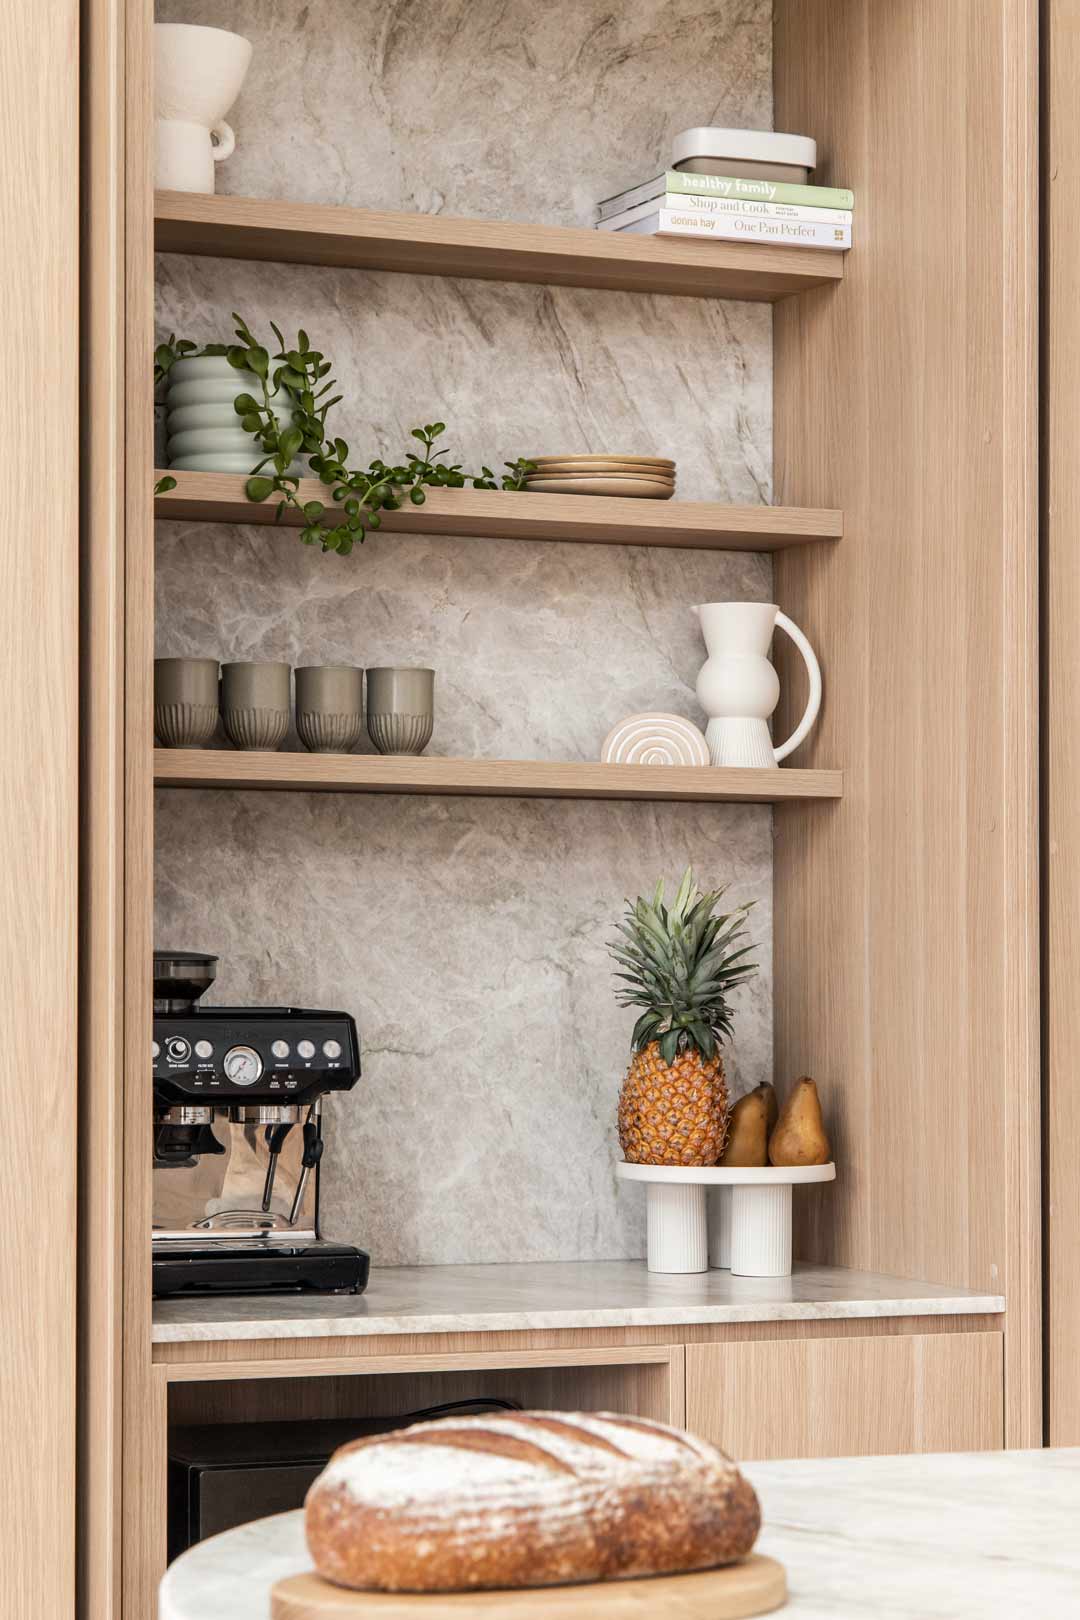 https://www.abiinteriors.com.au/wp-content/uploads/Simple-home-coffee-bar-set-up-seemlessly-intergrated-out-of-the-way-in-the-kitchen-of-modern-coastal-home.jpg?format=jpg